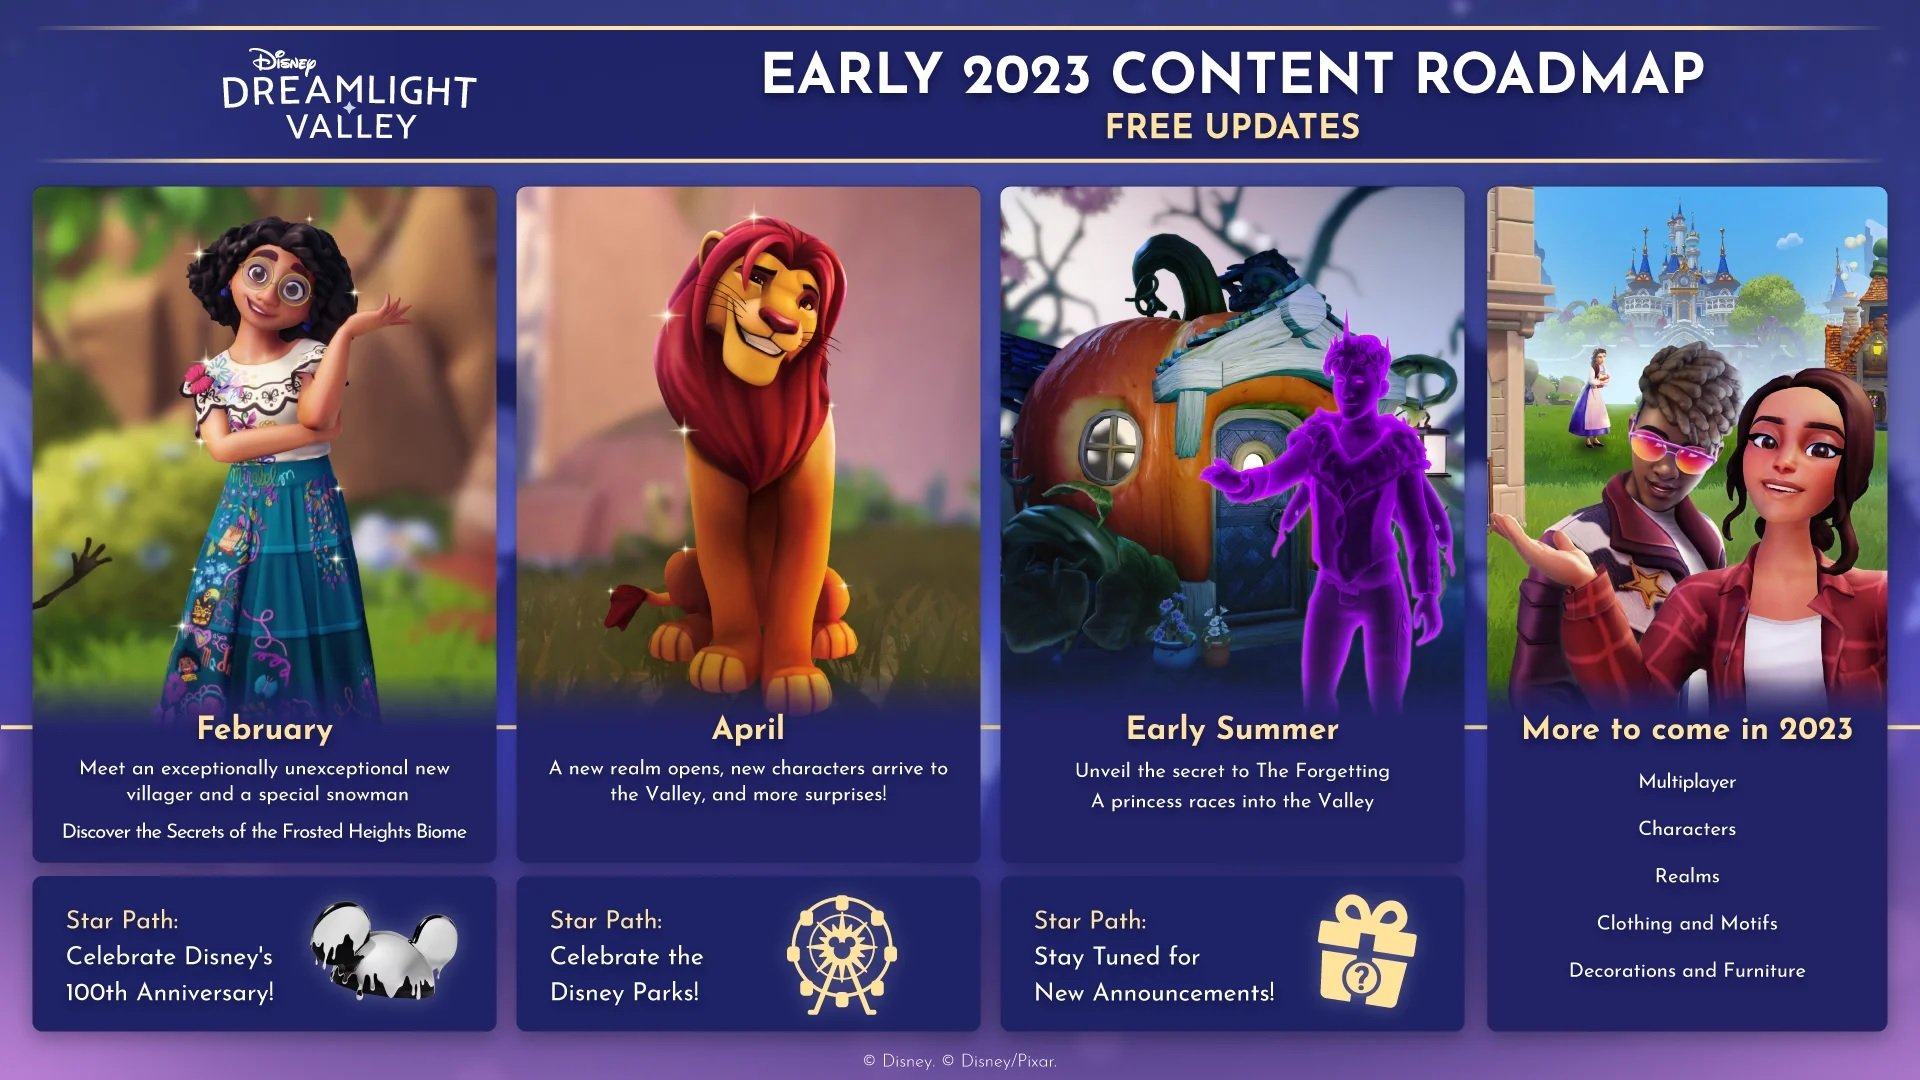 Disney Dreamlight Valley's next big patch is coming soon, with The Lion  King's Scar being introduced